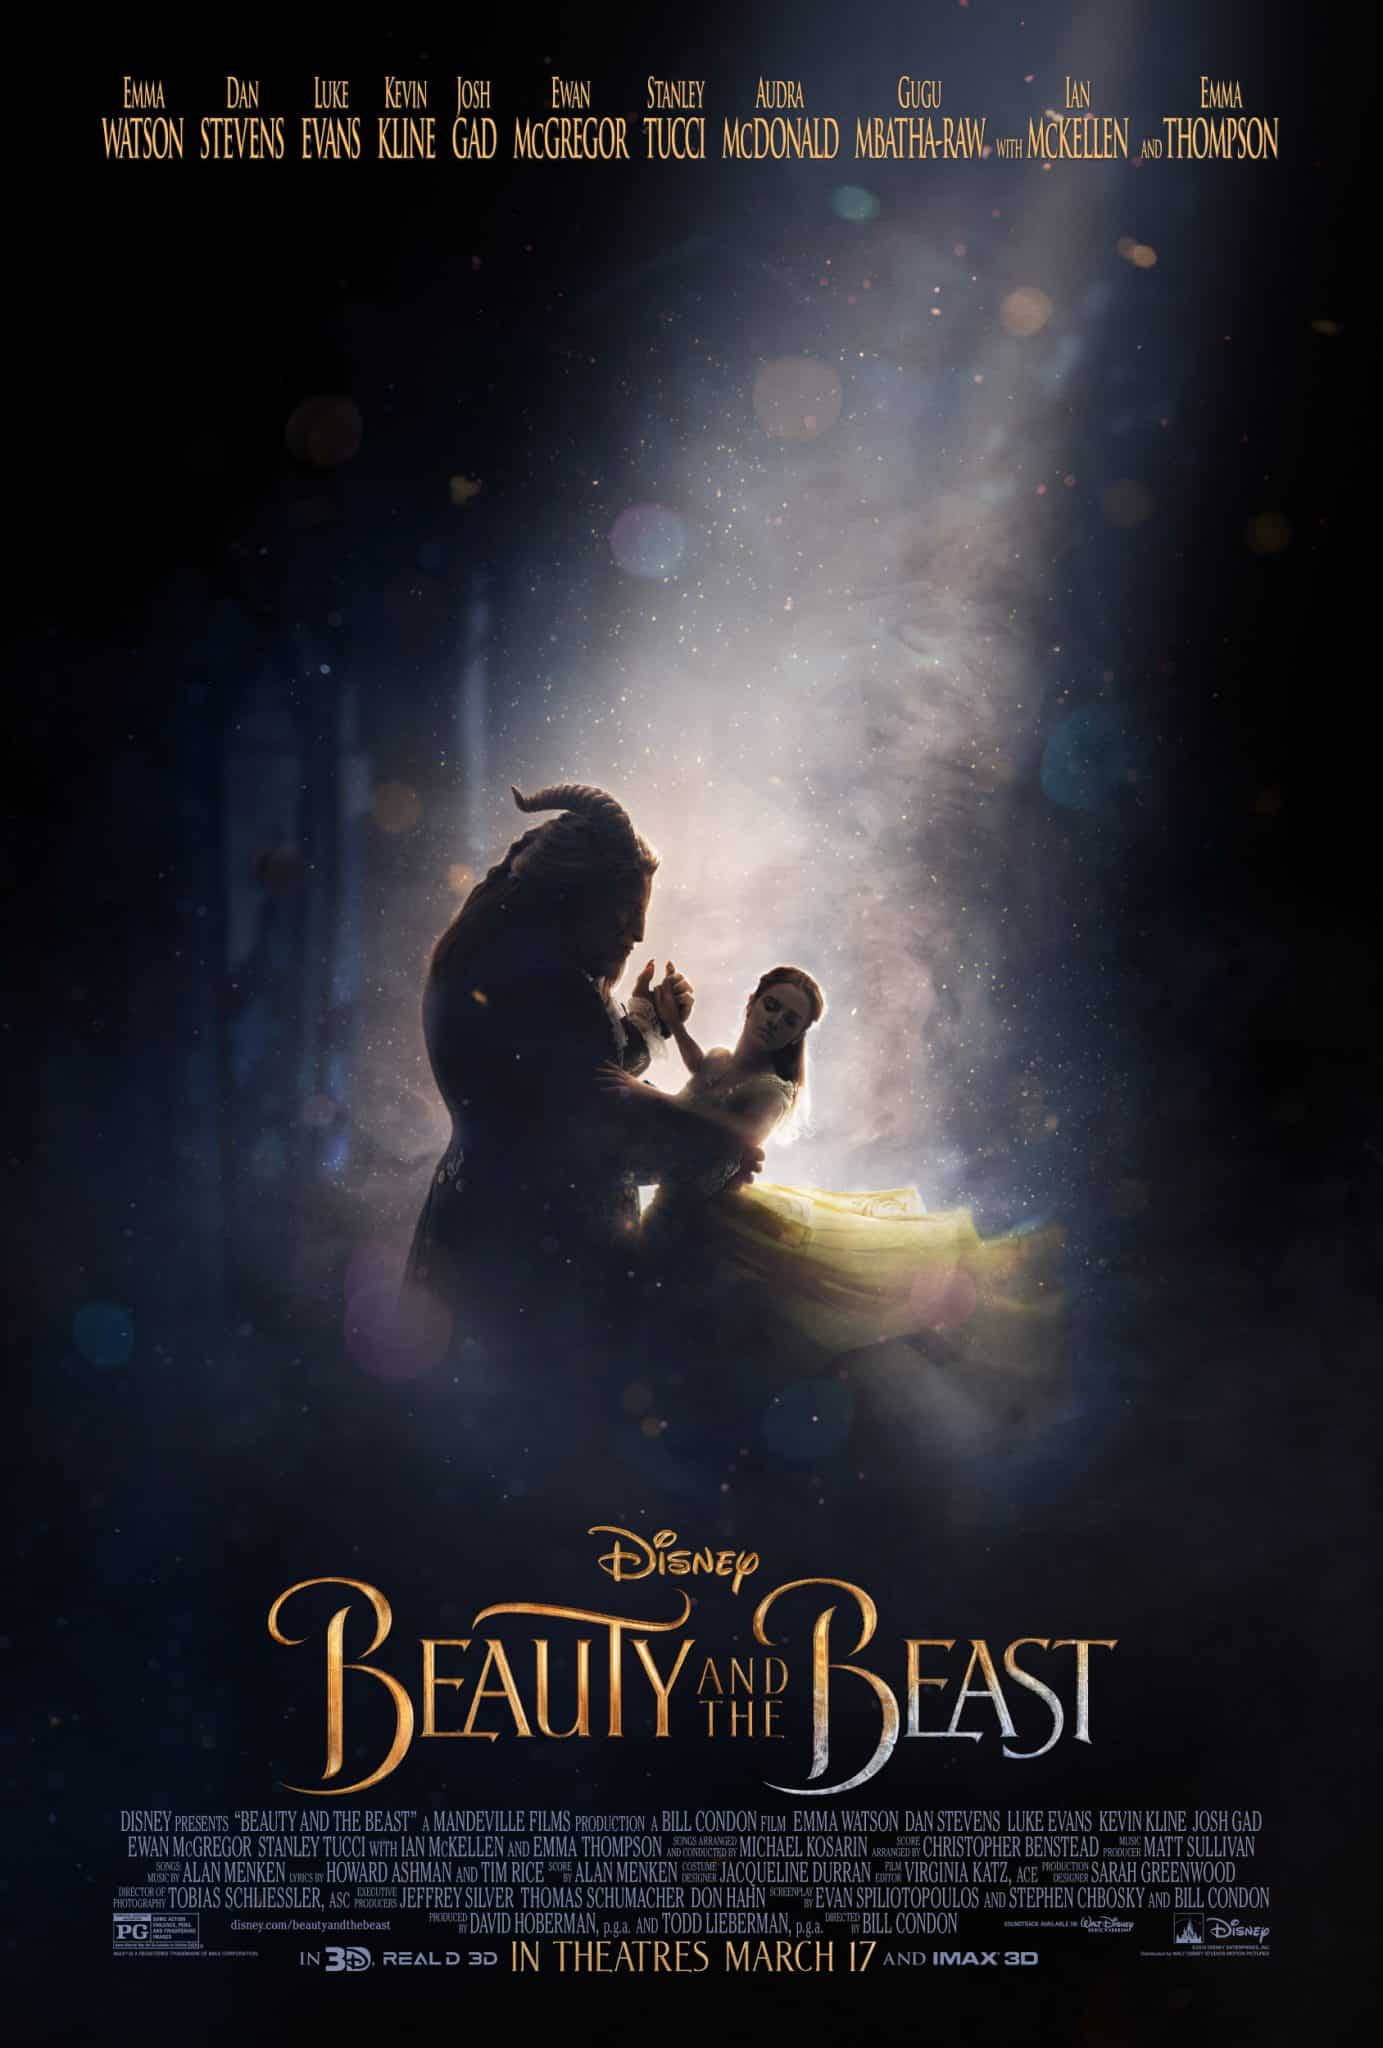 Celine Dion Perform Original Song for Disney's BEAUTY AND THE BEAST!!!  #BeOurGuest #BeautyAndTheBeast